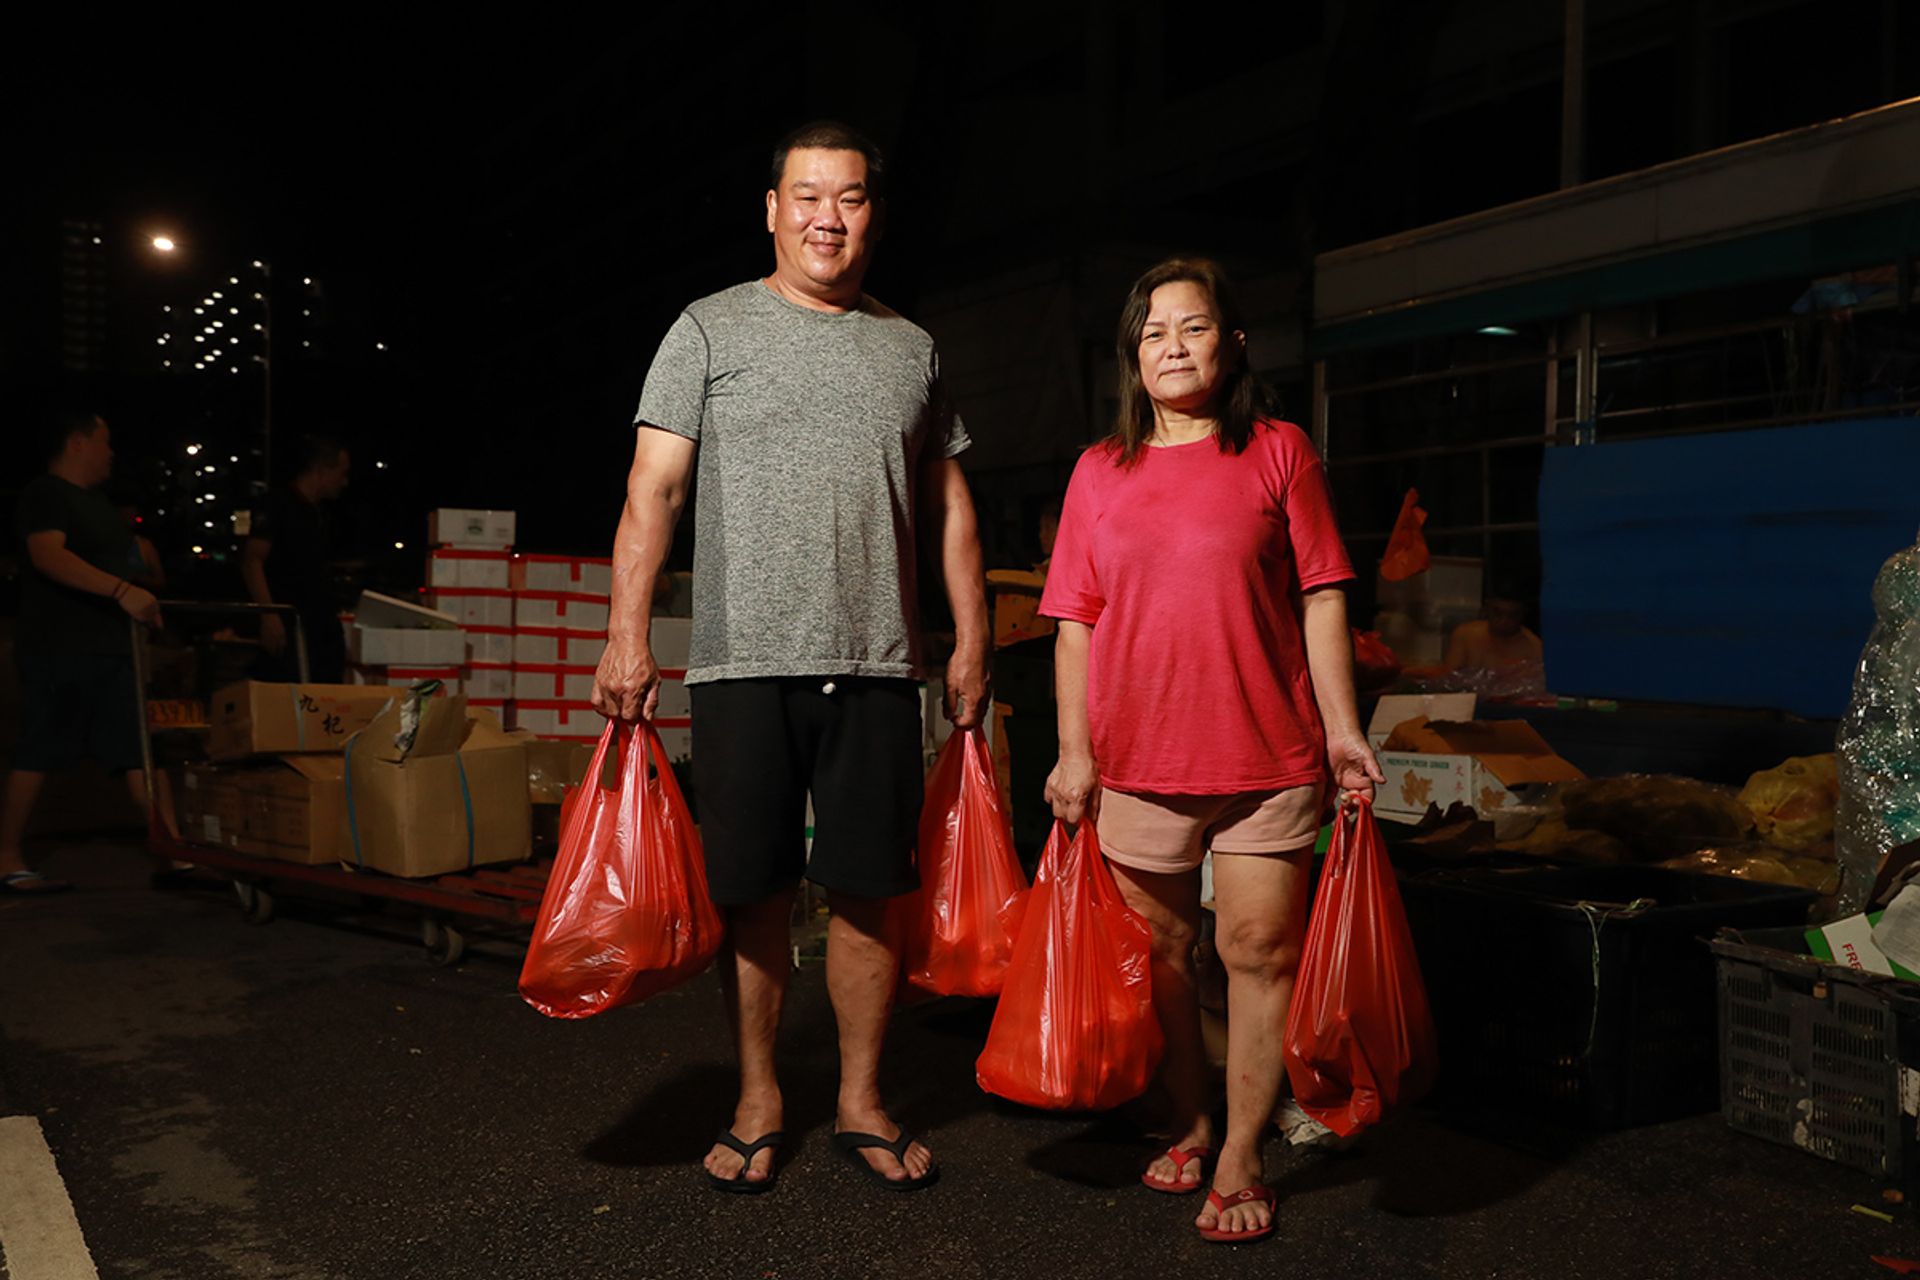 Mr David Po, 53, and his wife Yong Miau Eng, 57, run a yong tau foo stall in an industrial estate in Kaki Bukit. The couple have been buying vegetables for their stall from the night market since 2001, even before they were married. “We come here every day. Even rainy day, we also come,” said Mr Po.